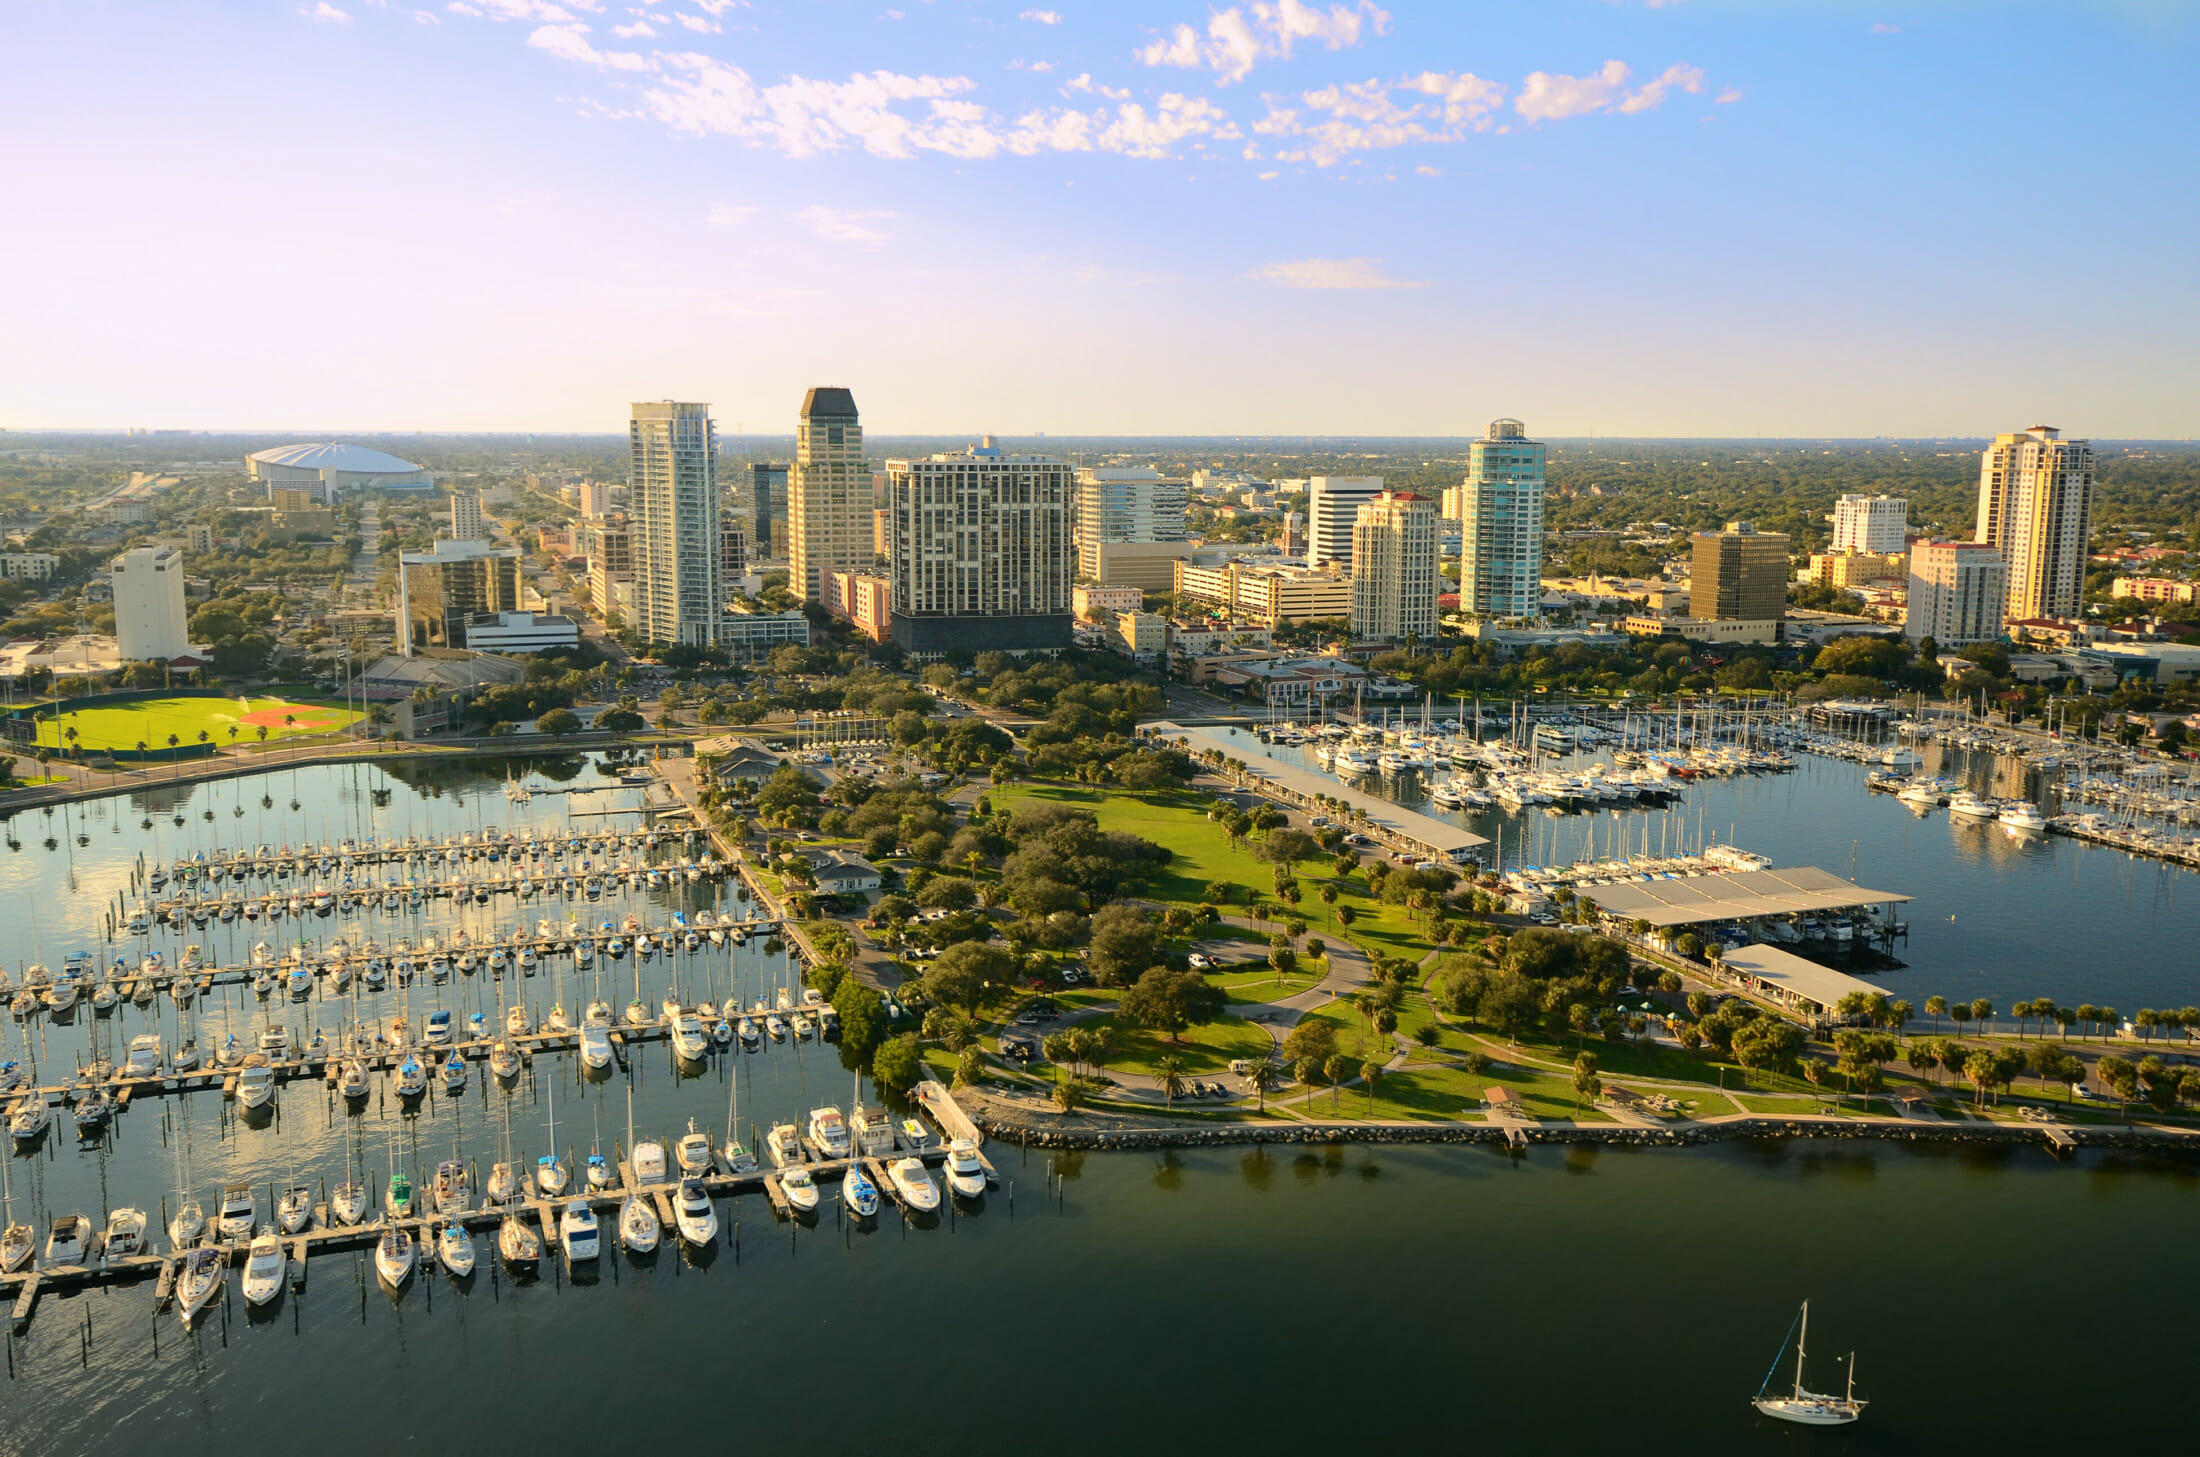 St. Petersburg, Florida | 50 Up-and-Coming Real Estate Markets to Watch in 2019 | Buildium